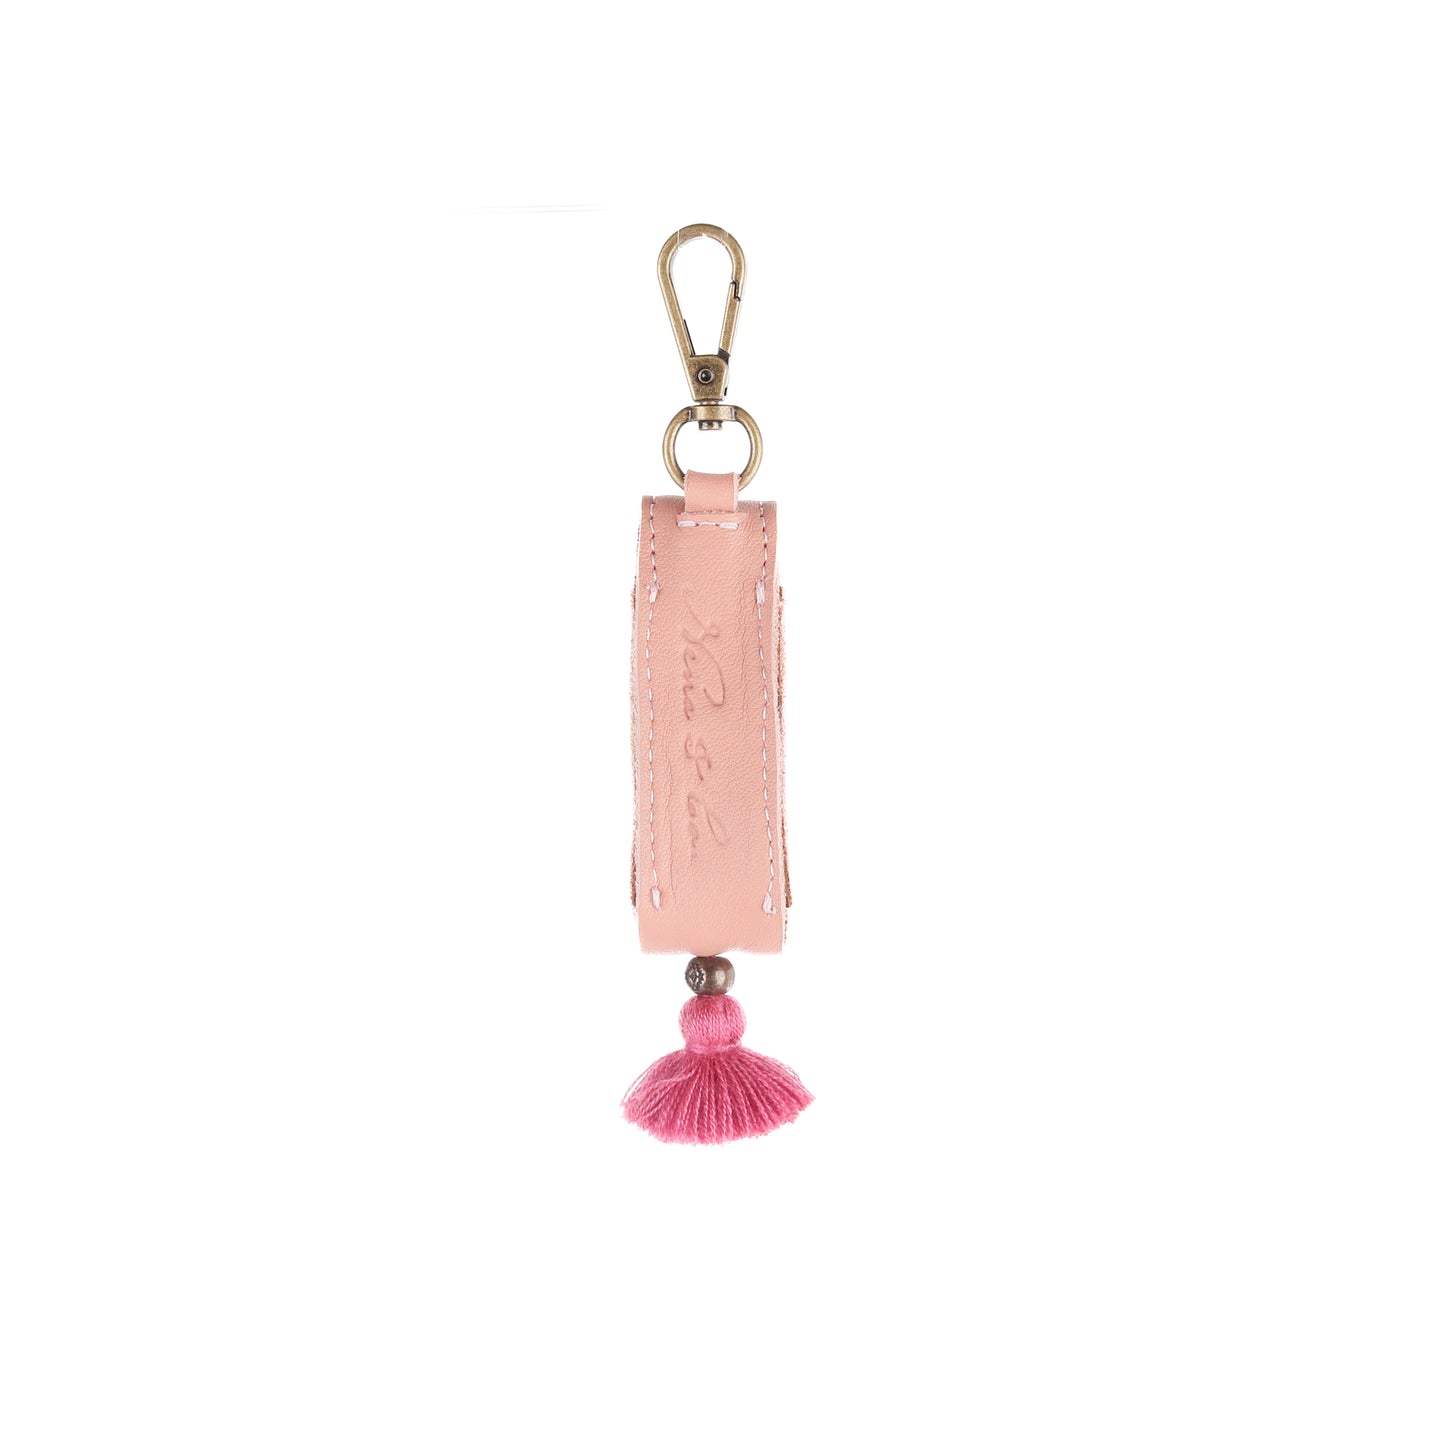 LIPSTICK CHARM - BREAST CANCER AWARENESS CAPSULE - ROSE PINK